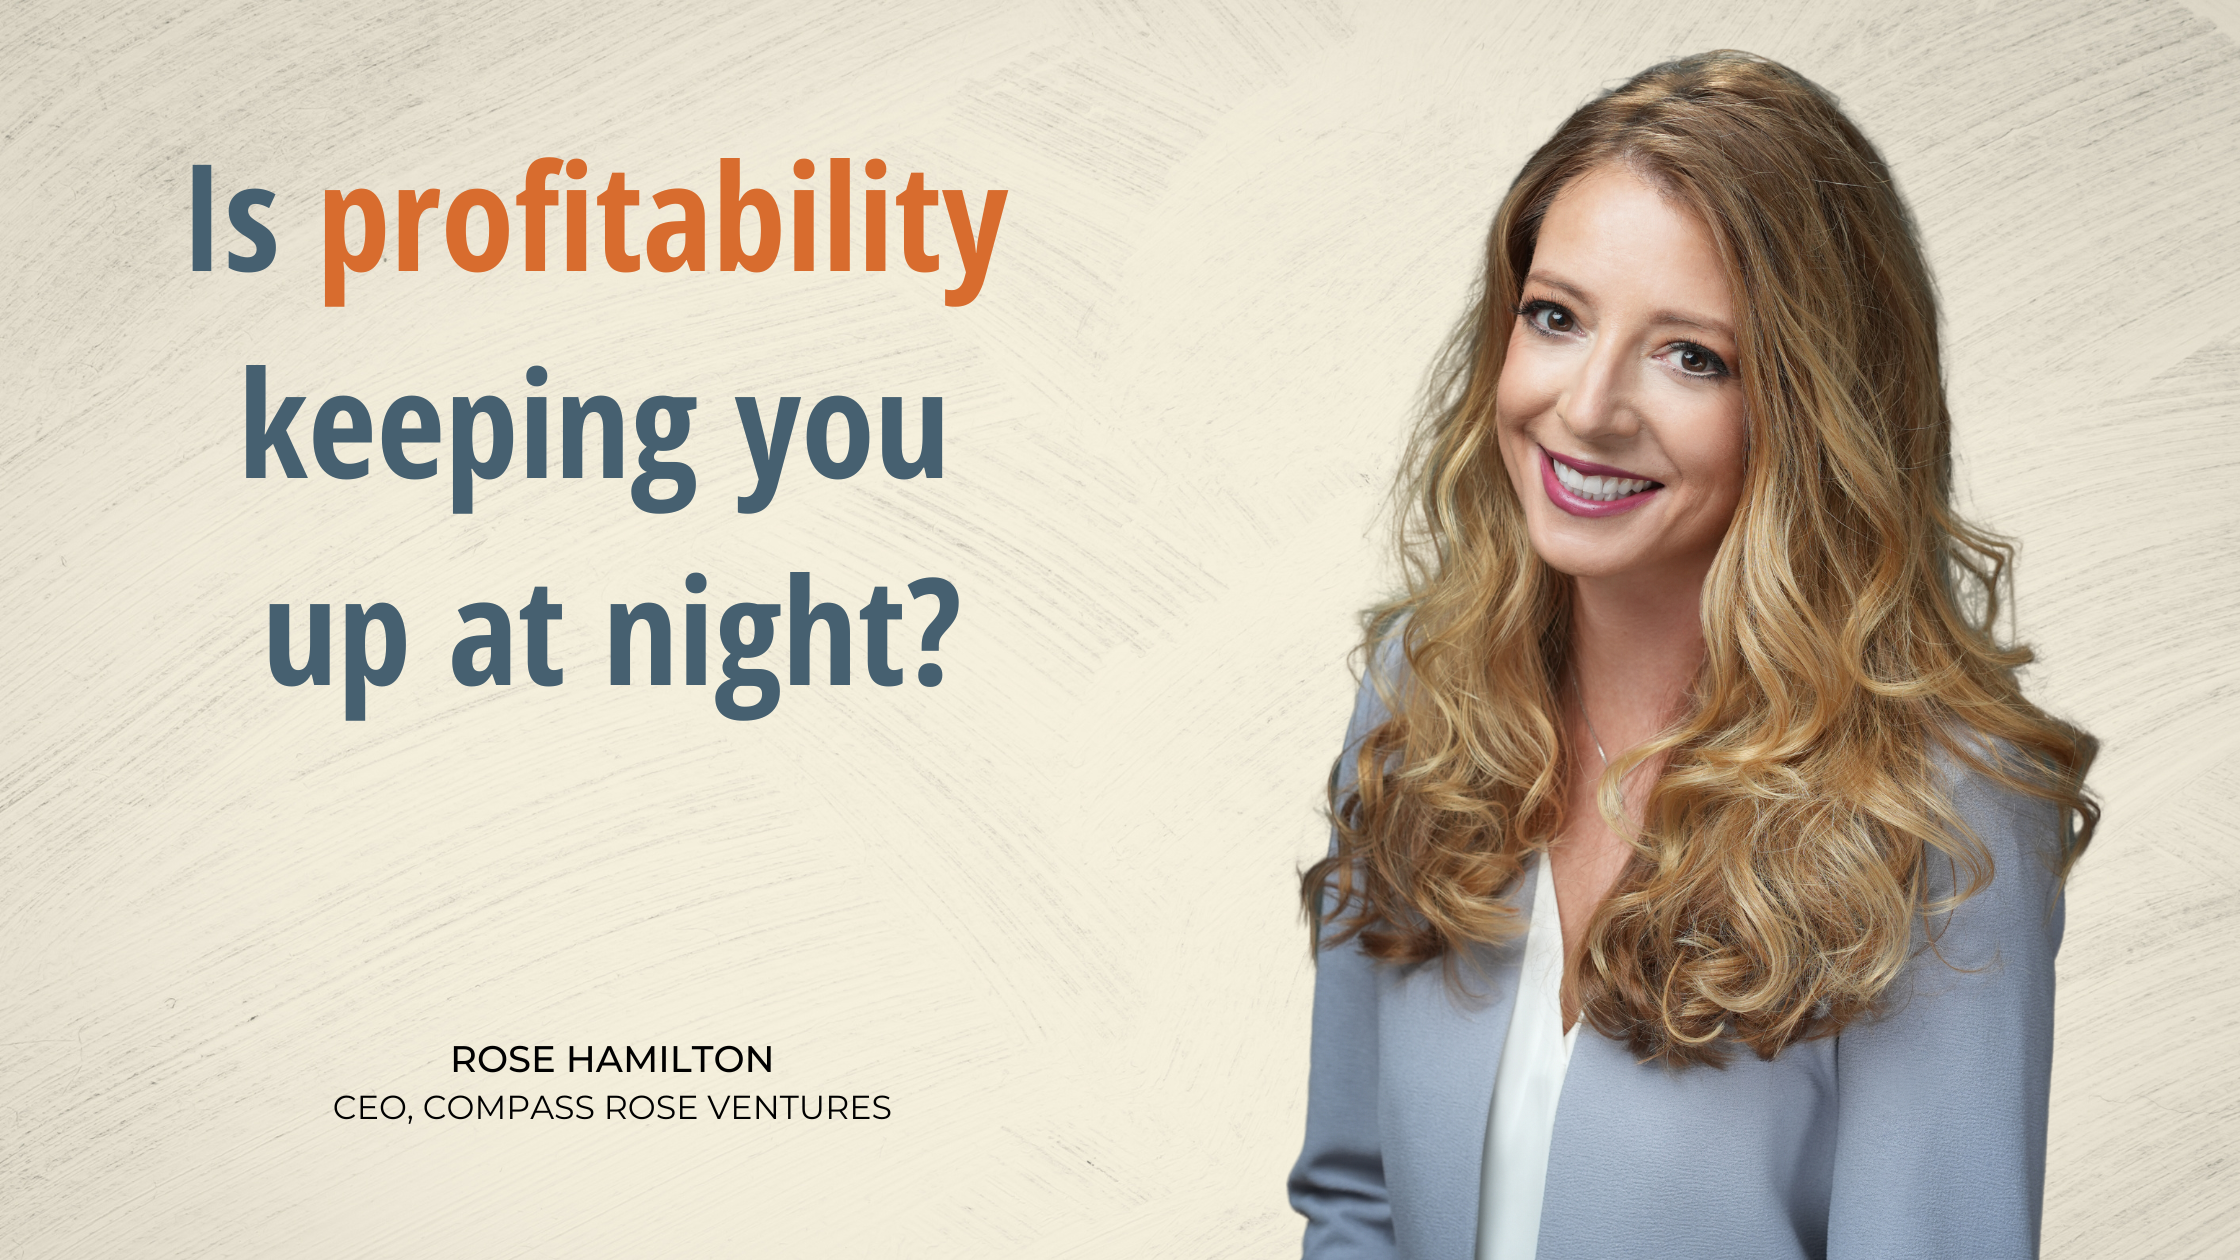 Is profitability keeping you up at night?